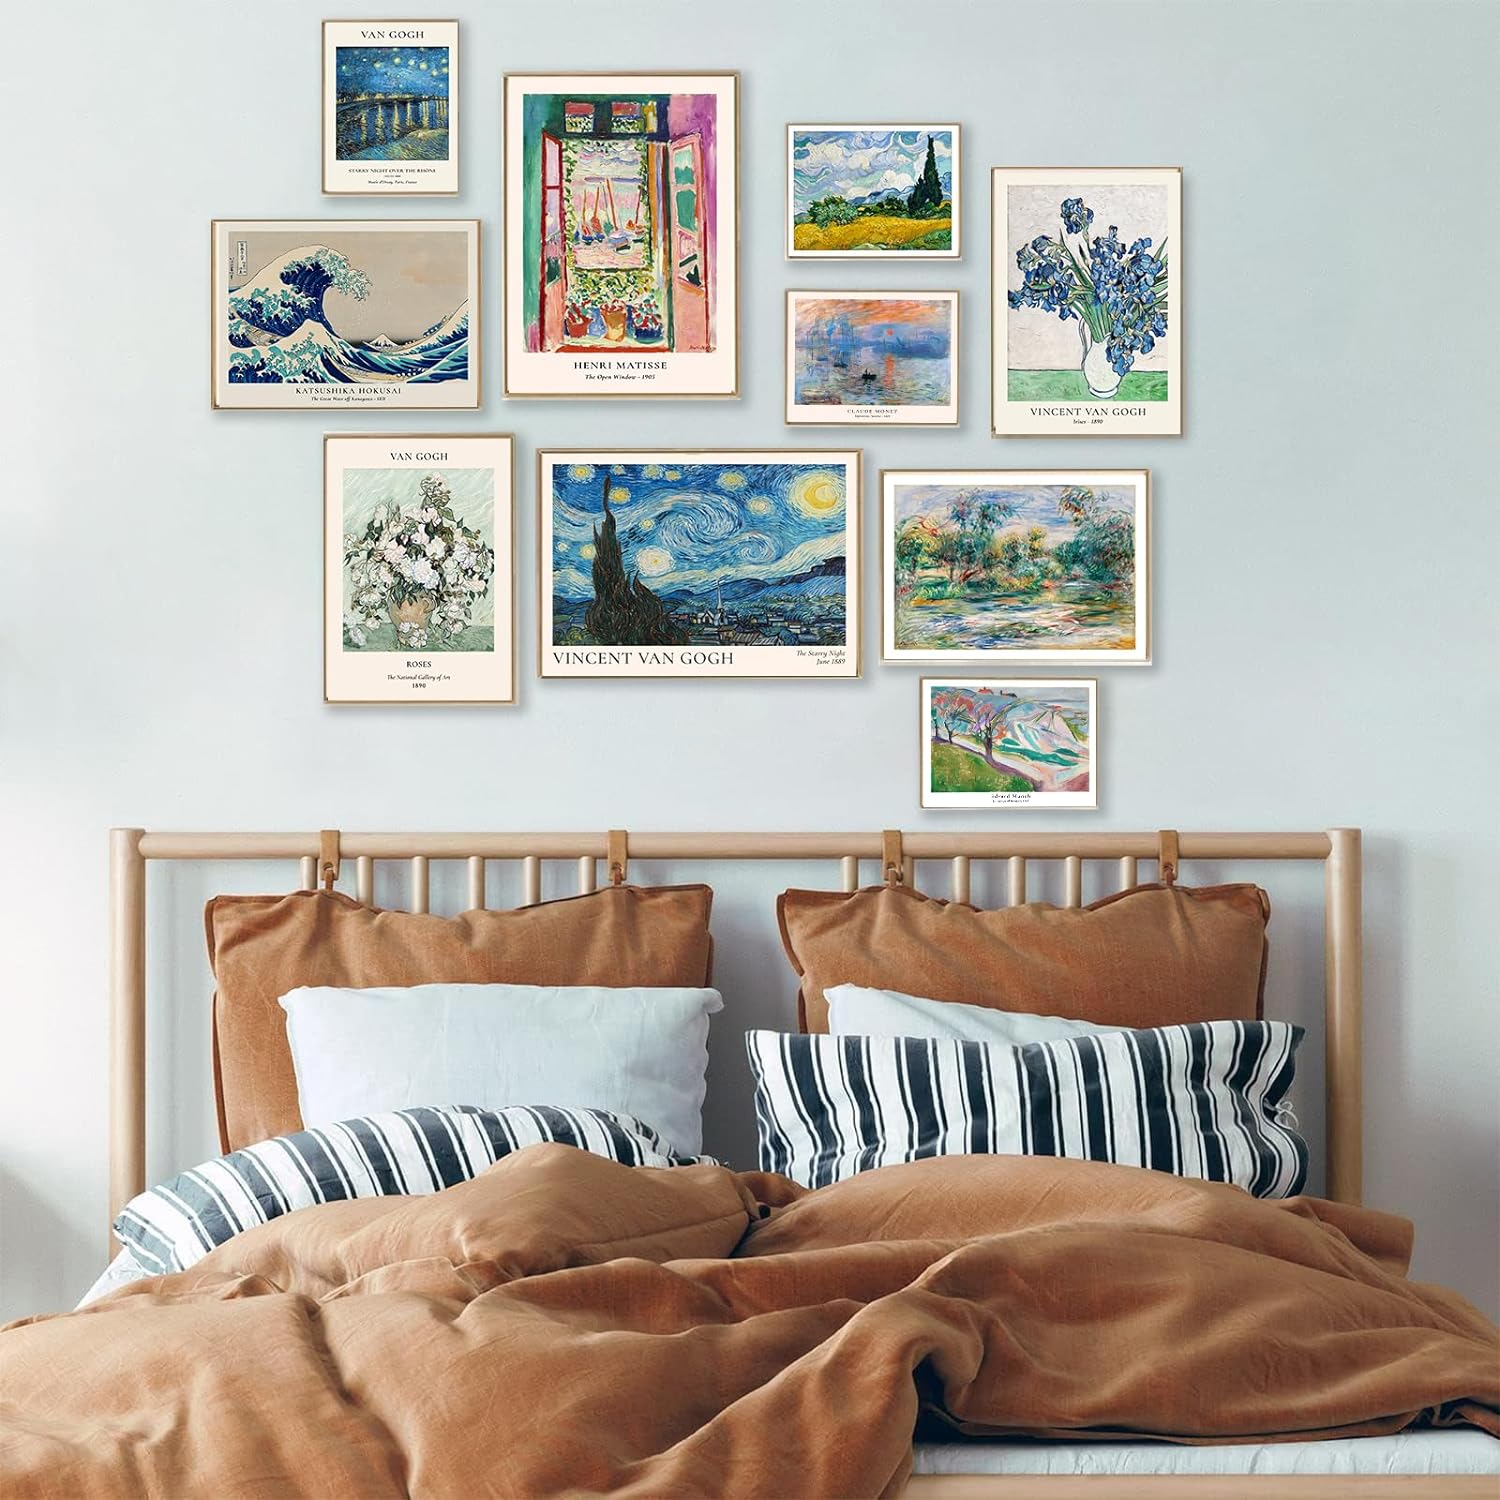 Vintage Eclectic Wall Decor Set of 9, Abstract Eclectic Prints Matisse Van Gogh Claude Monet Maximalist Famous Artist Painting Aesthetic Pictures, Trendy Maximalism Poster for Aesthetic Bedroom,